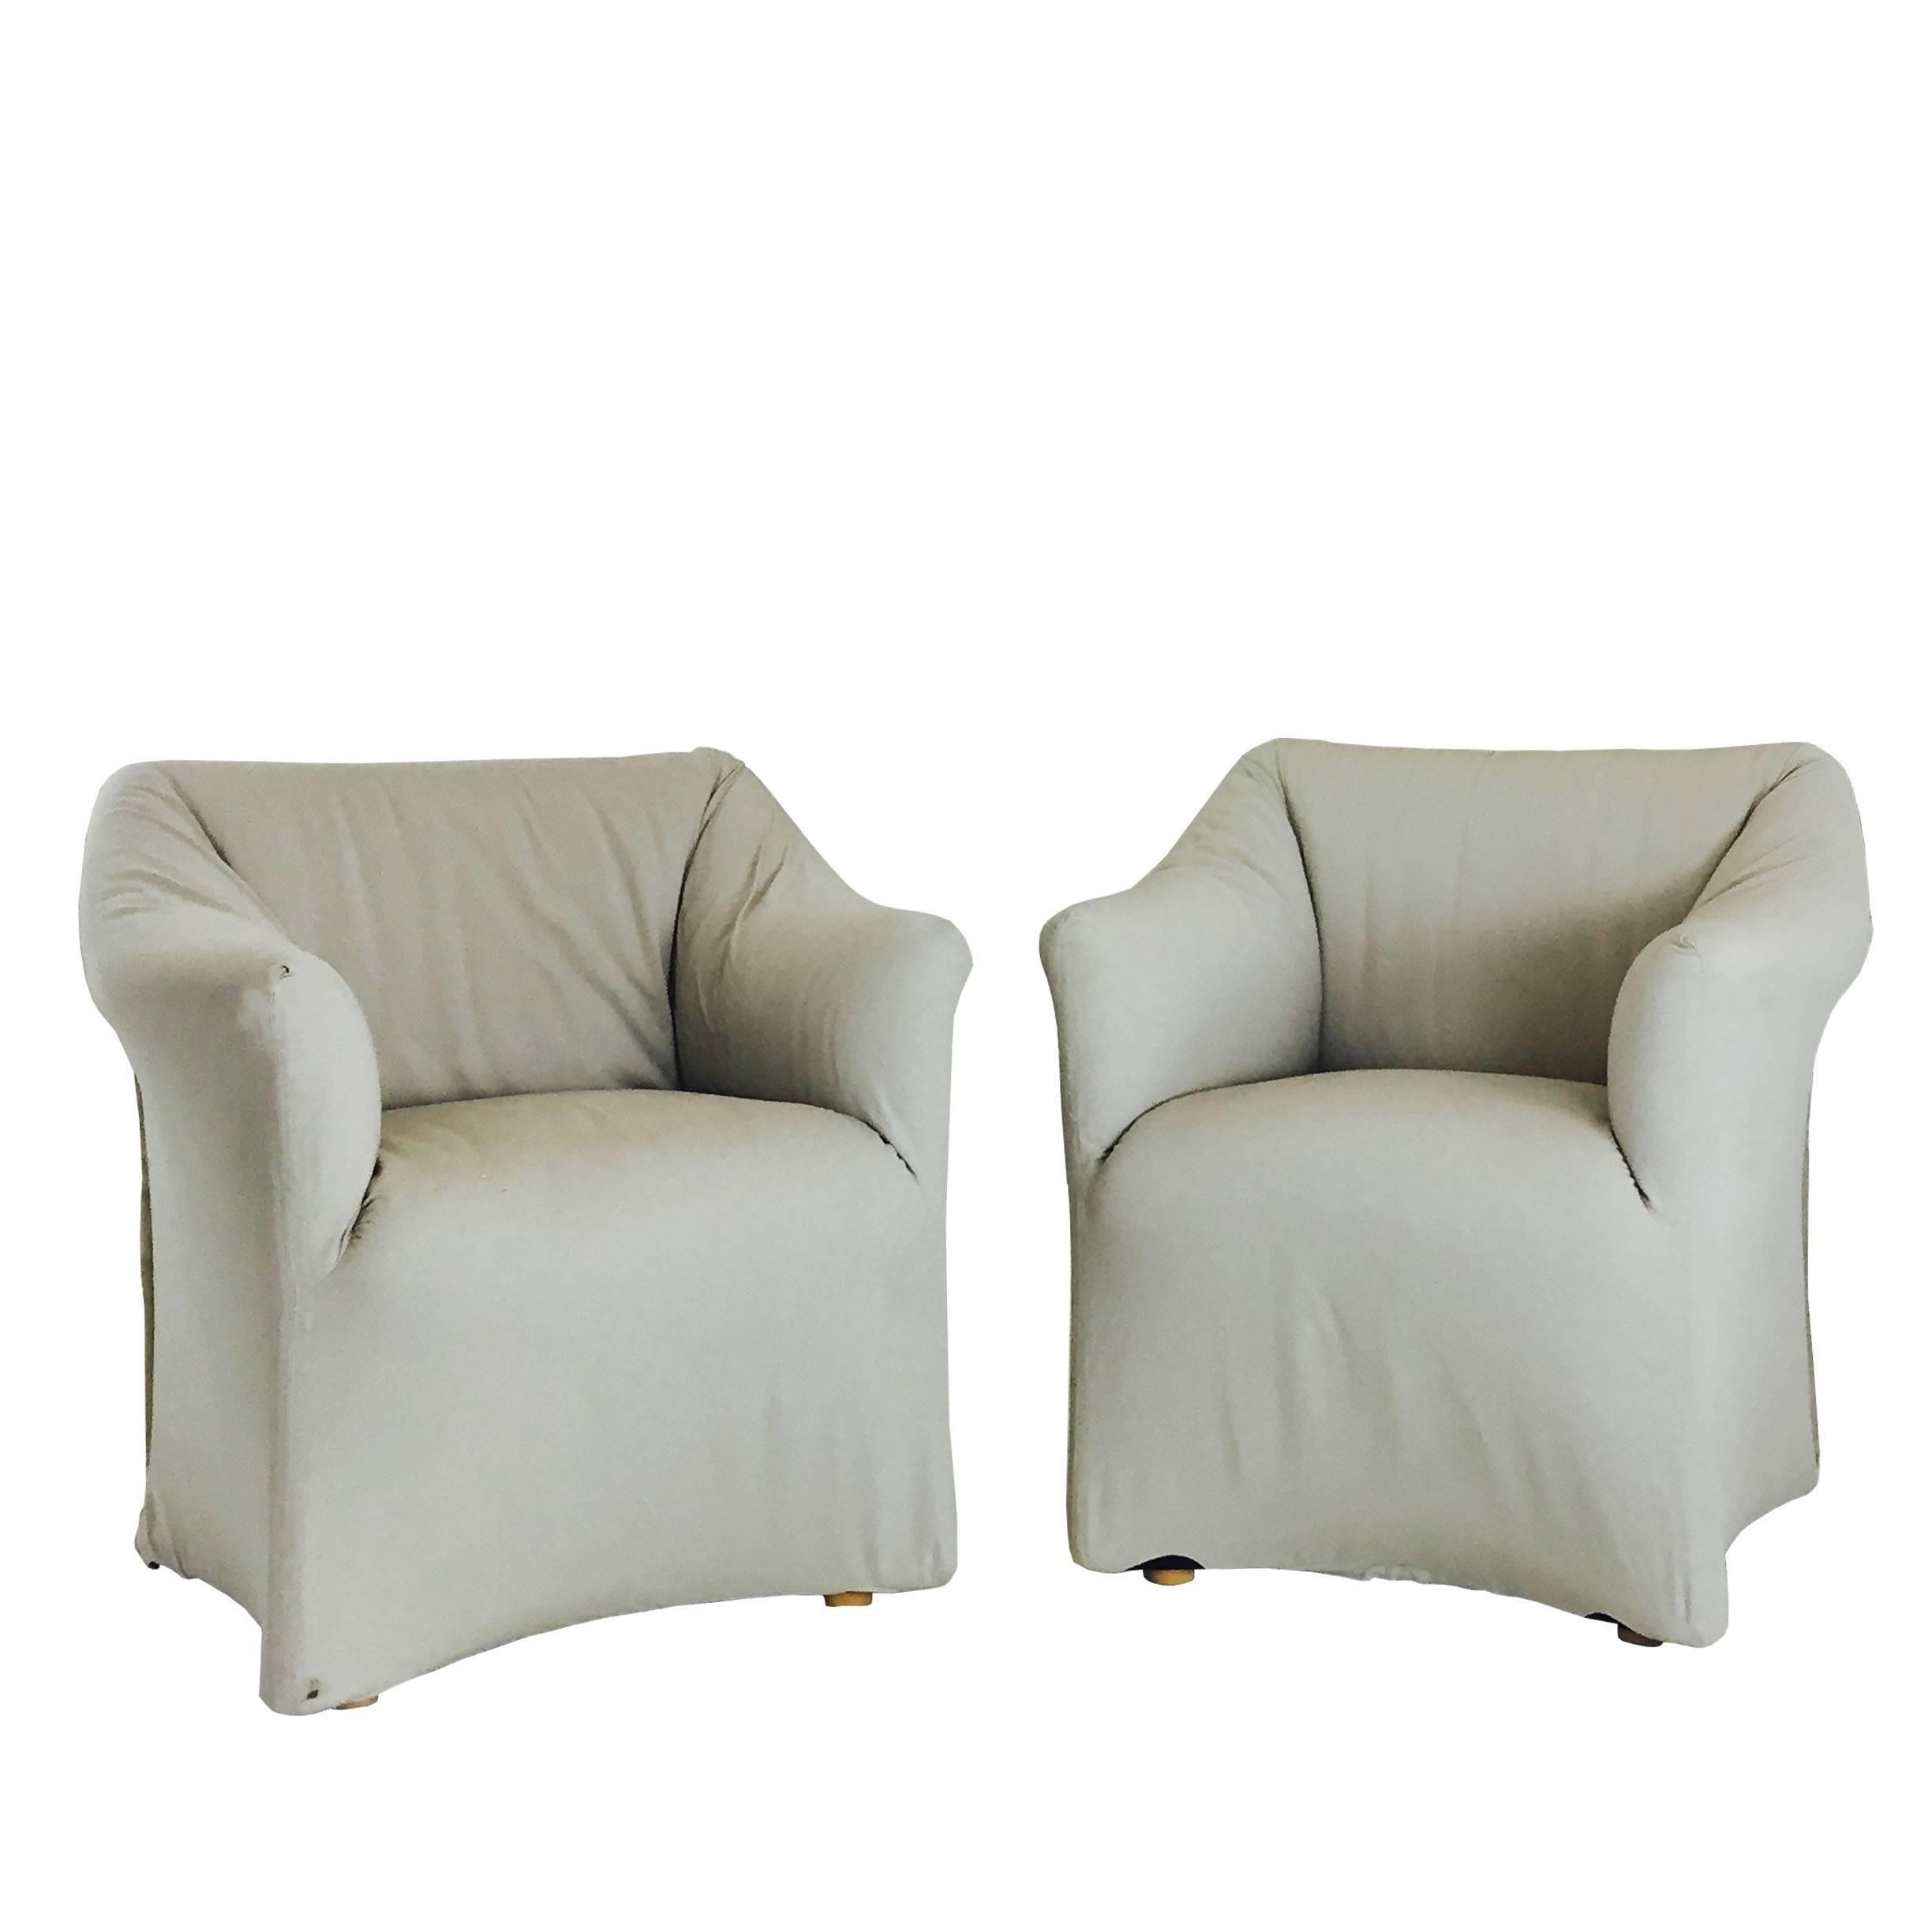 Pair of Tentazione Lounge Chairs for Cassina by Mario Bellini